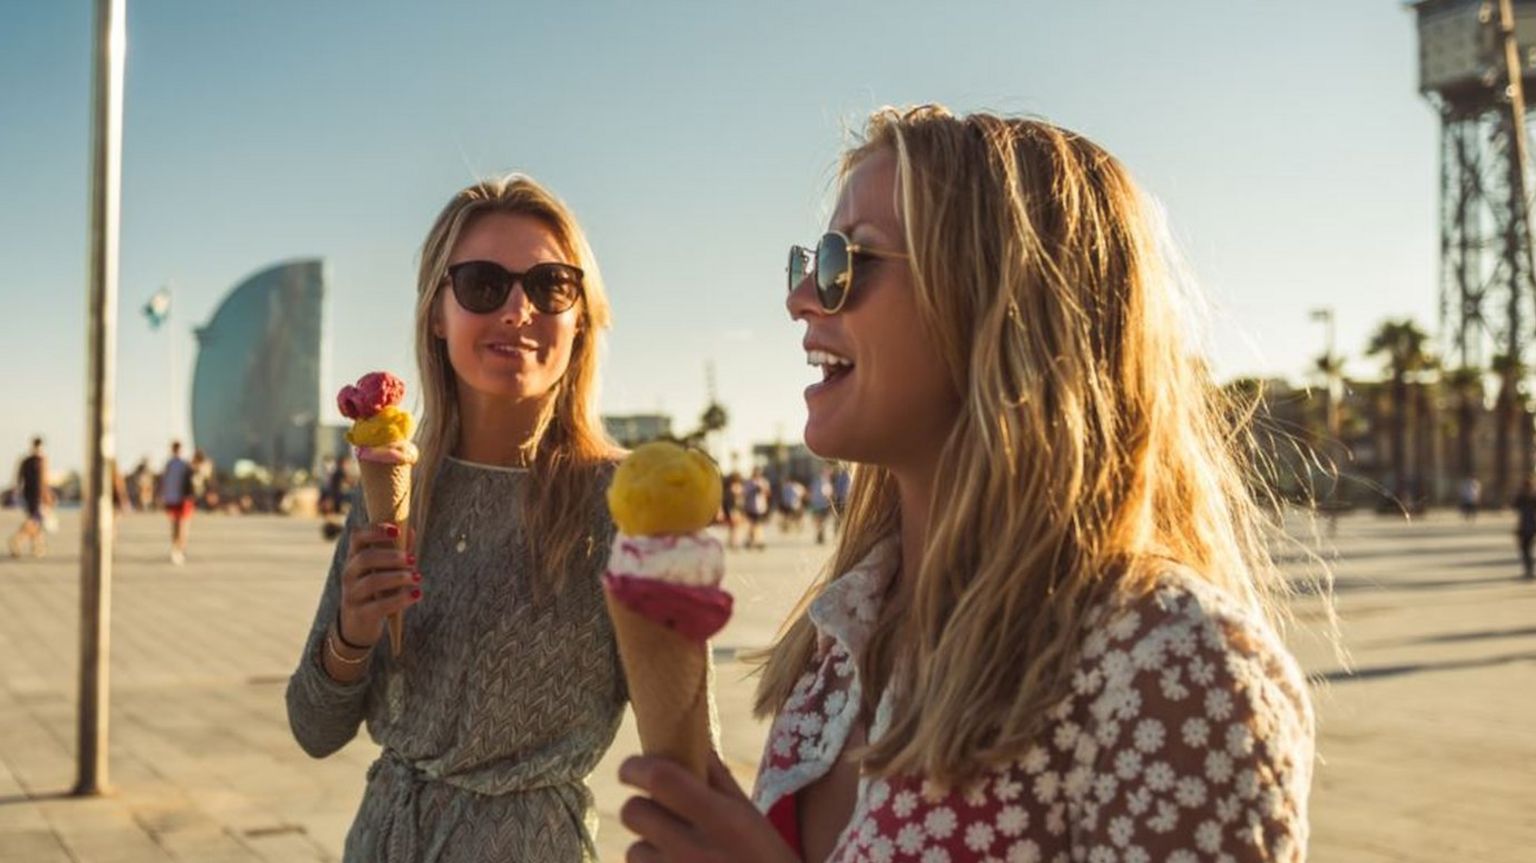 Two women eating ice cream on holiday